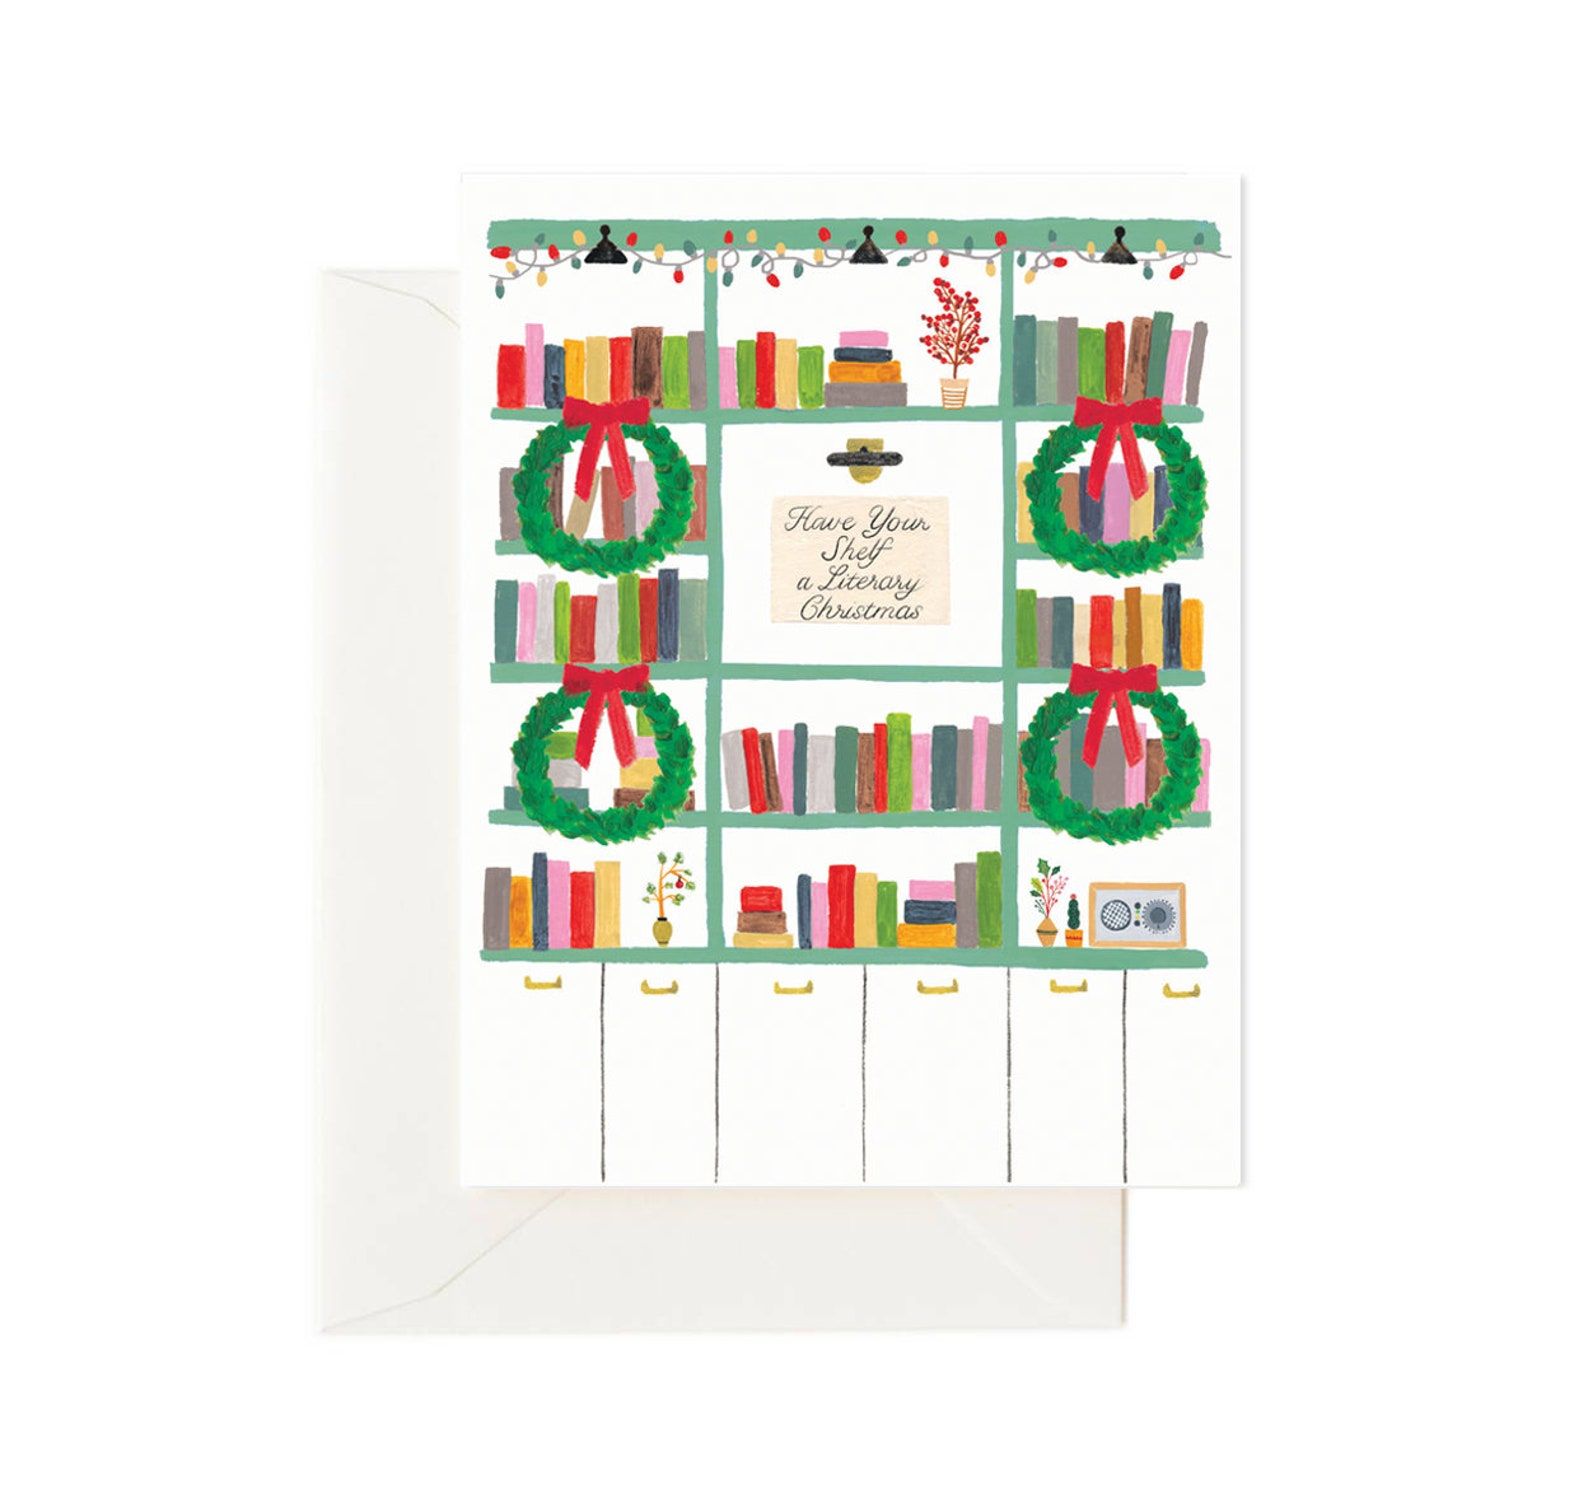 A card with a painting of colorful book shelves decorated for Christmas and a message that reads "Have your shelf a literary Christmas"